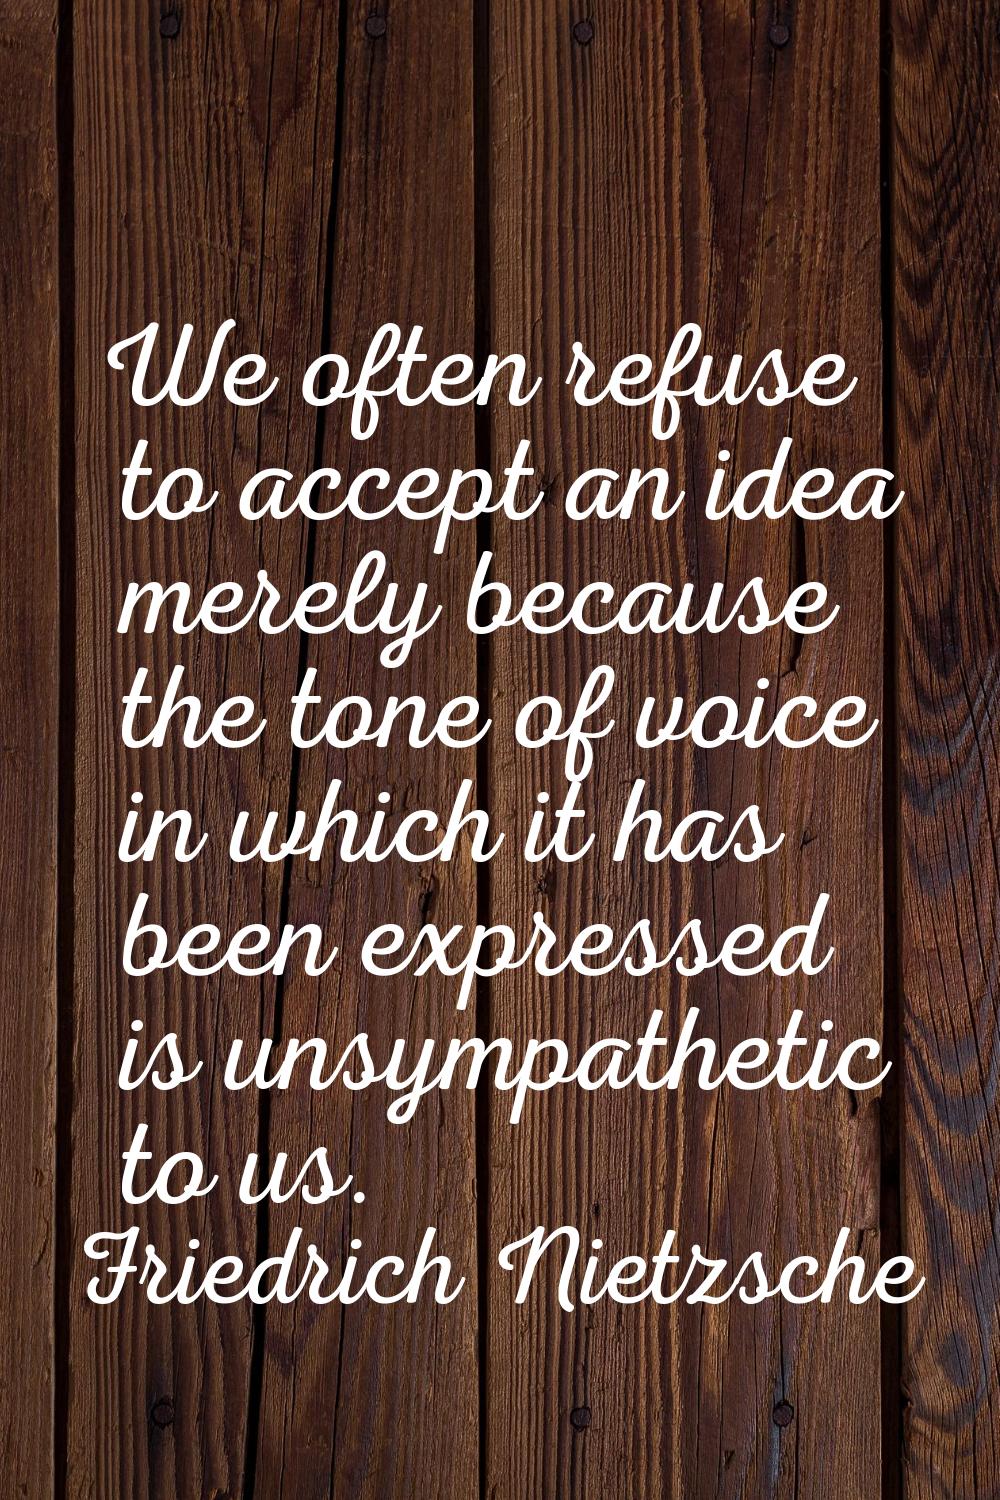 We often refuse to accept an idea merely because the tone of voice in which it has been expressed i